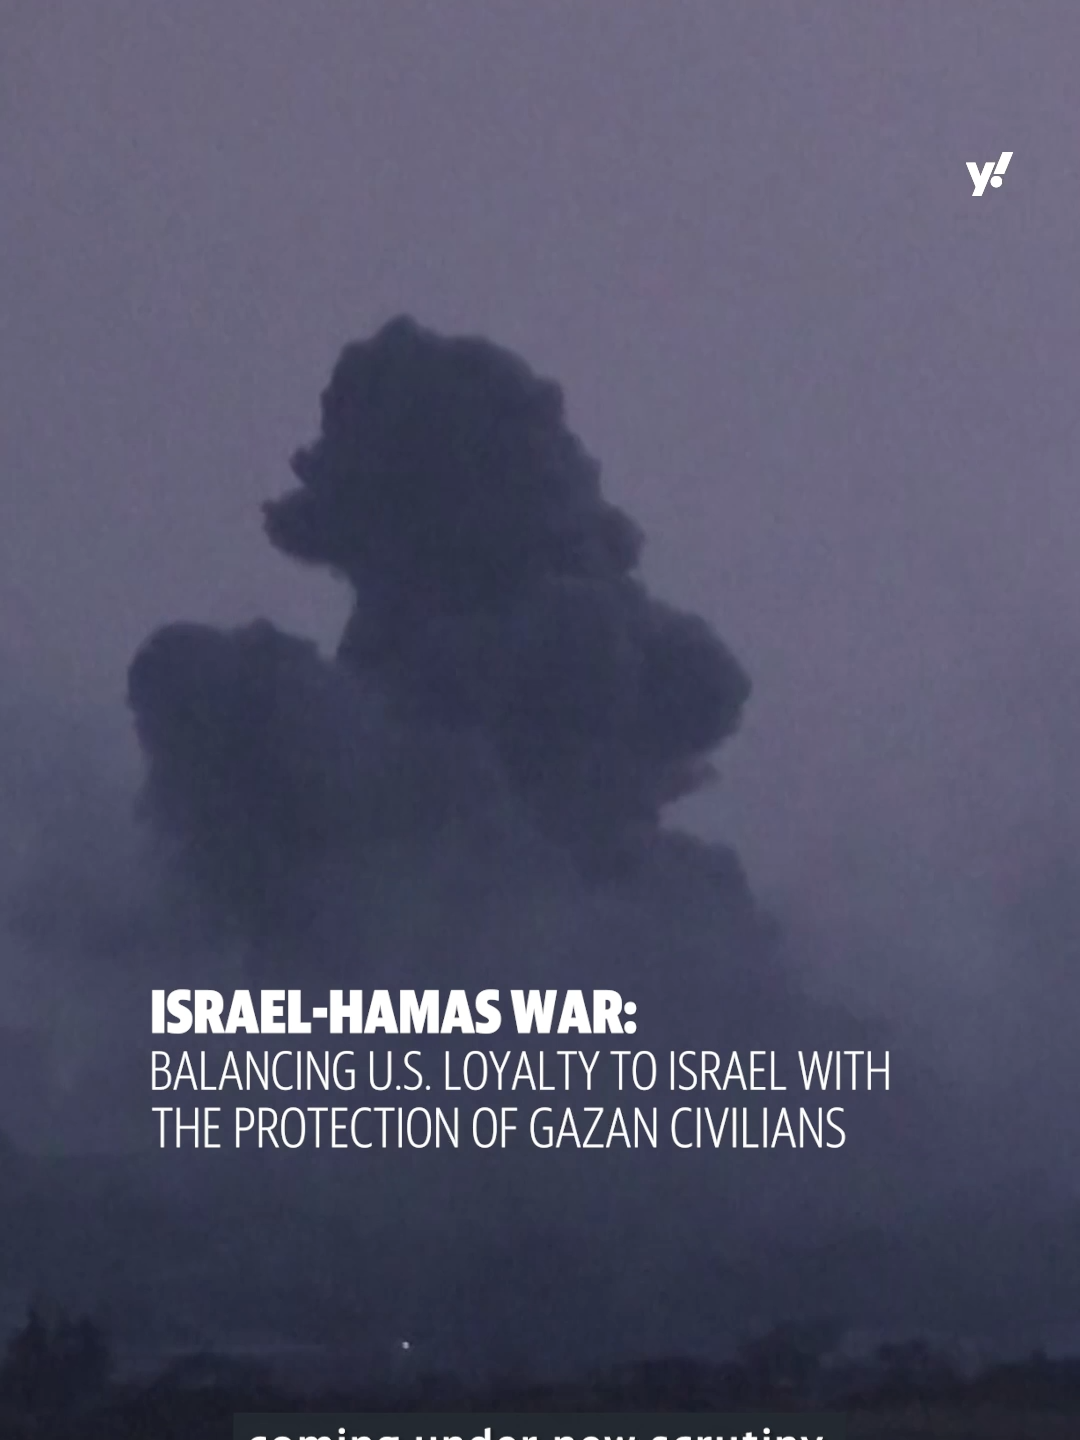 Israel's war with Hamas is coming under new scrutiny, as the U.S. balances its loyalty to Israel with the protection of Gazan civilians. Here's what you need to know. #news #israel🇮🇱 #palestine🇵🇸 #worldnews #yahoonews